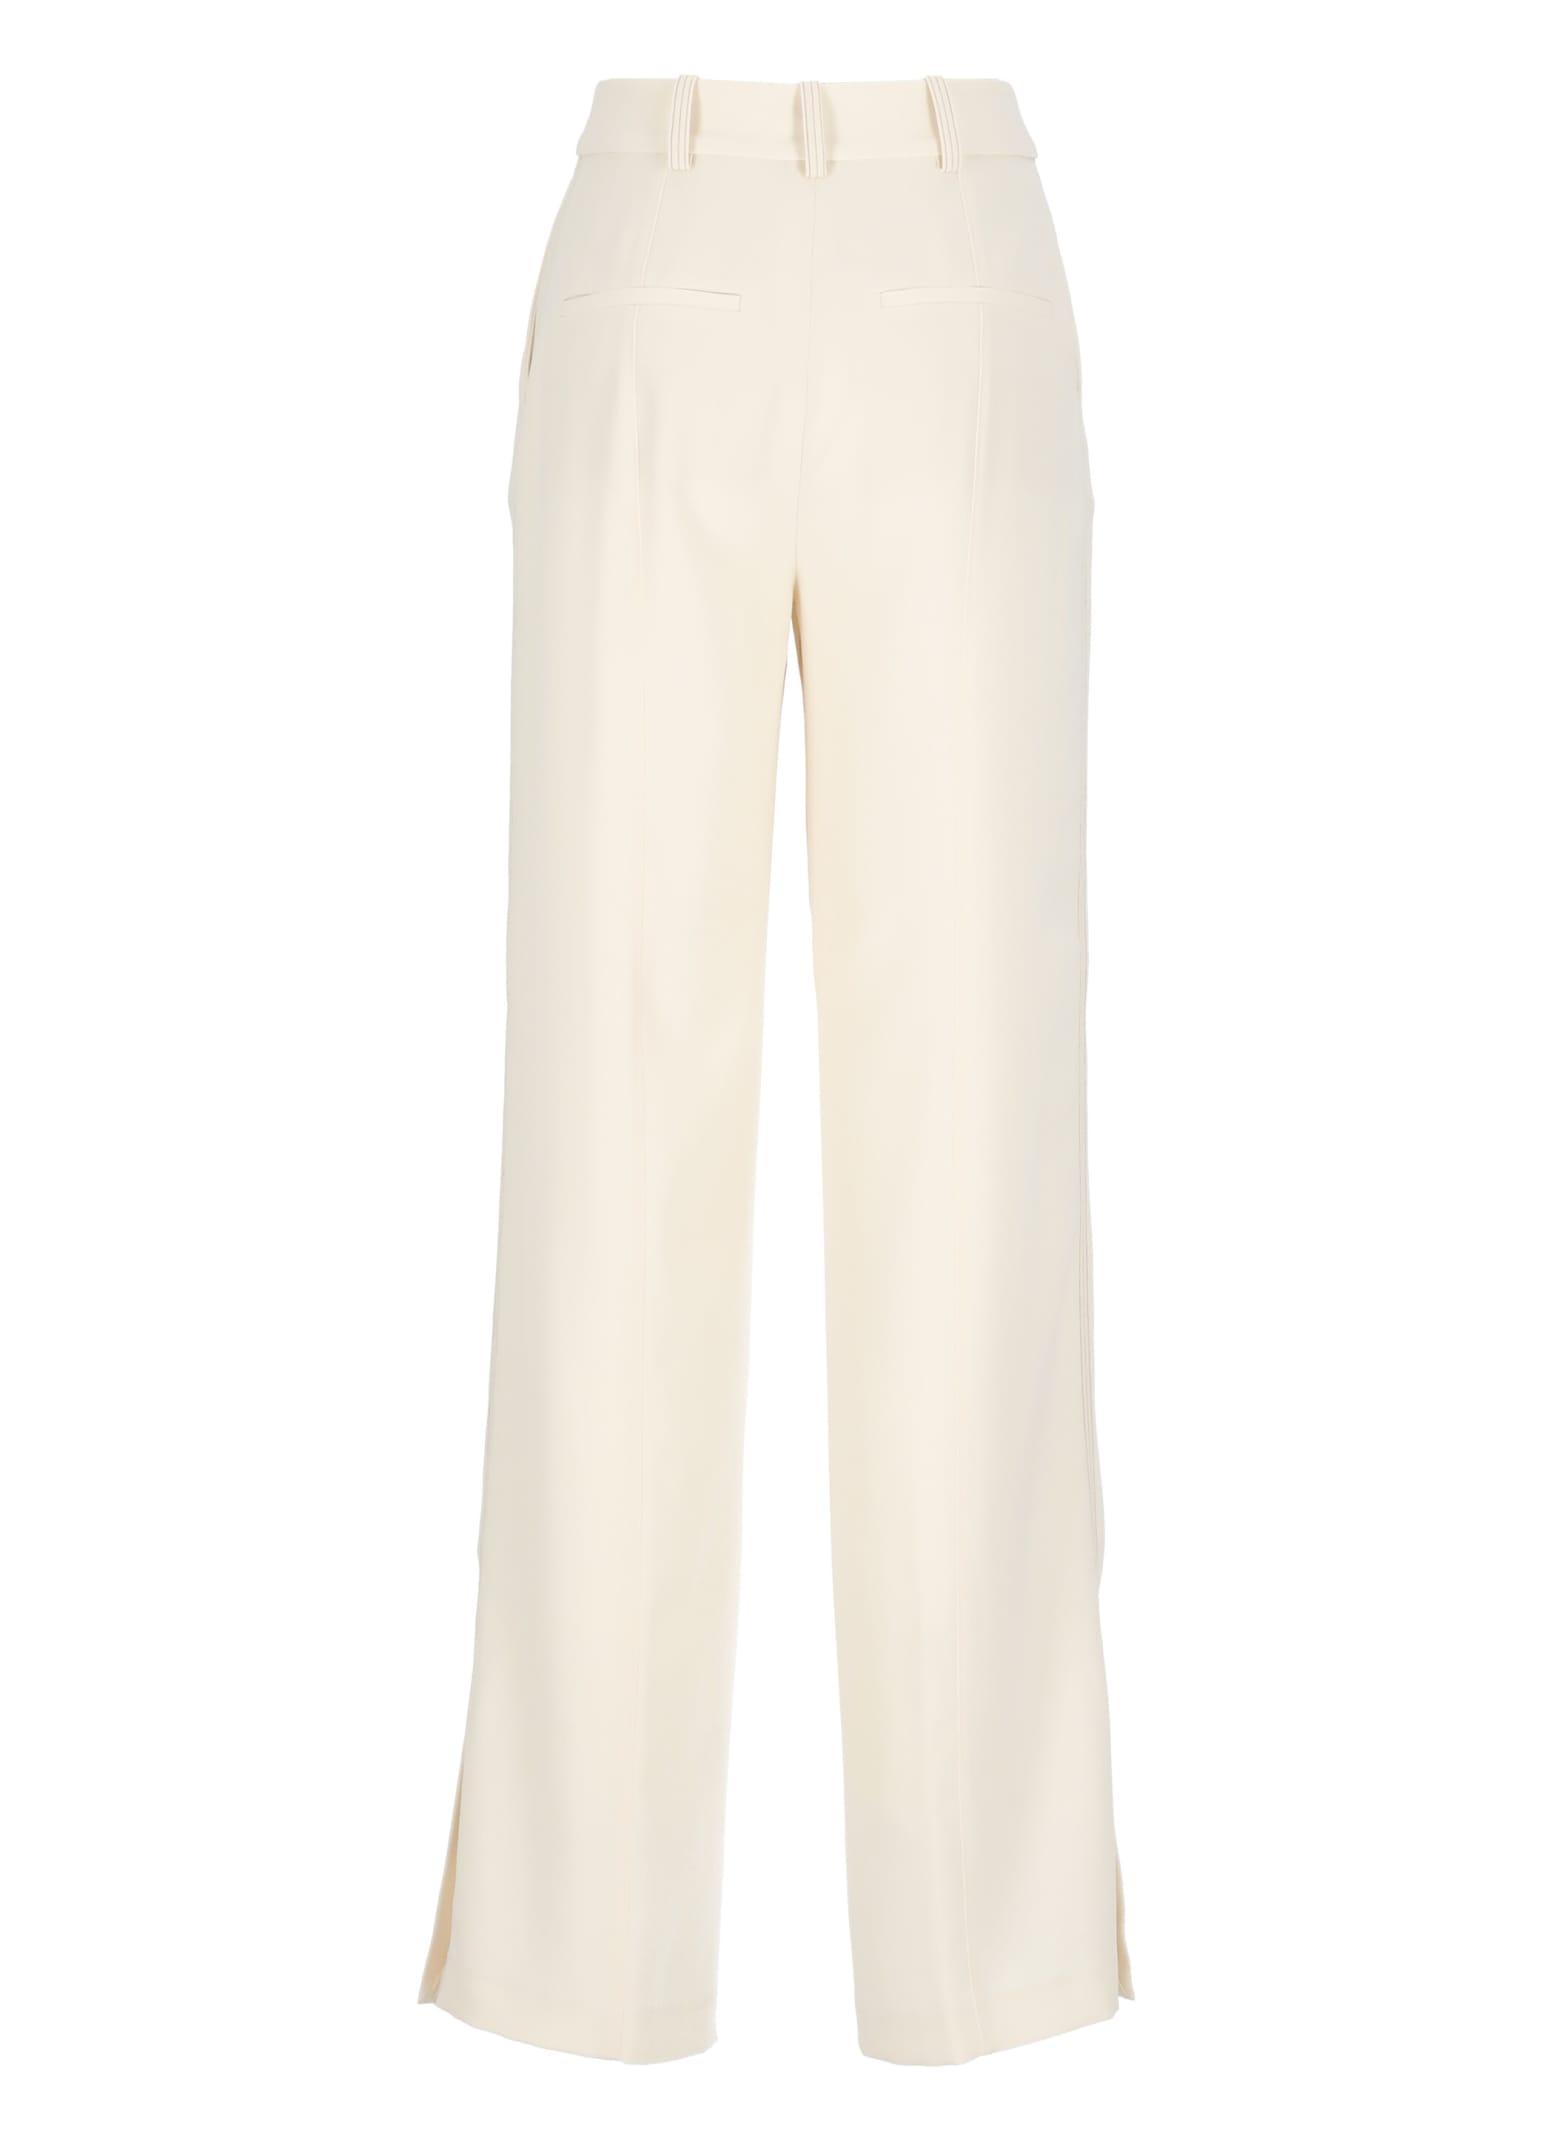 Calvin Klein Twill Palazzo Trousers in White | Lyst